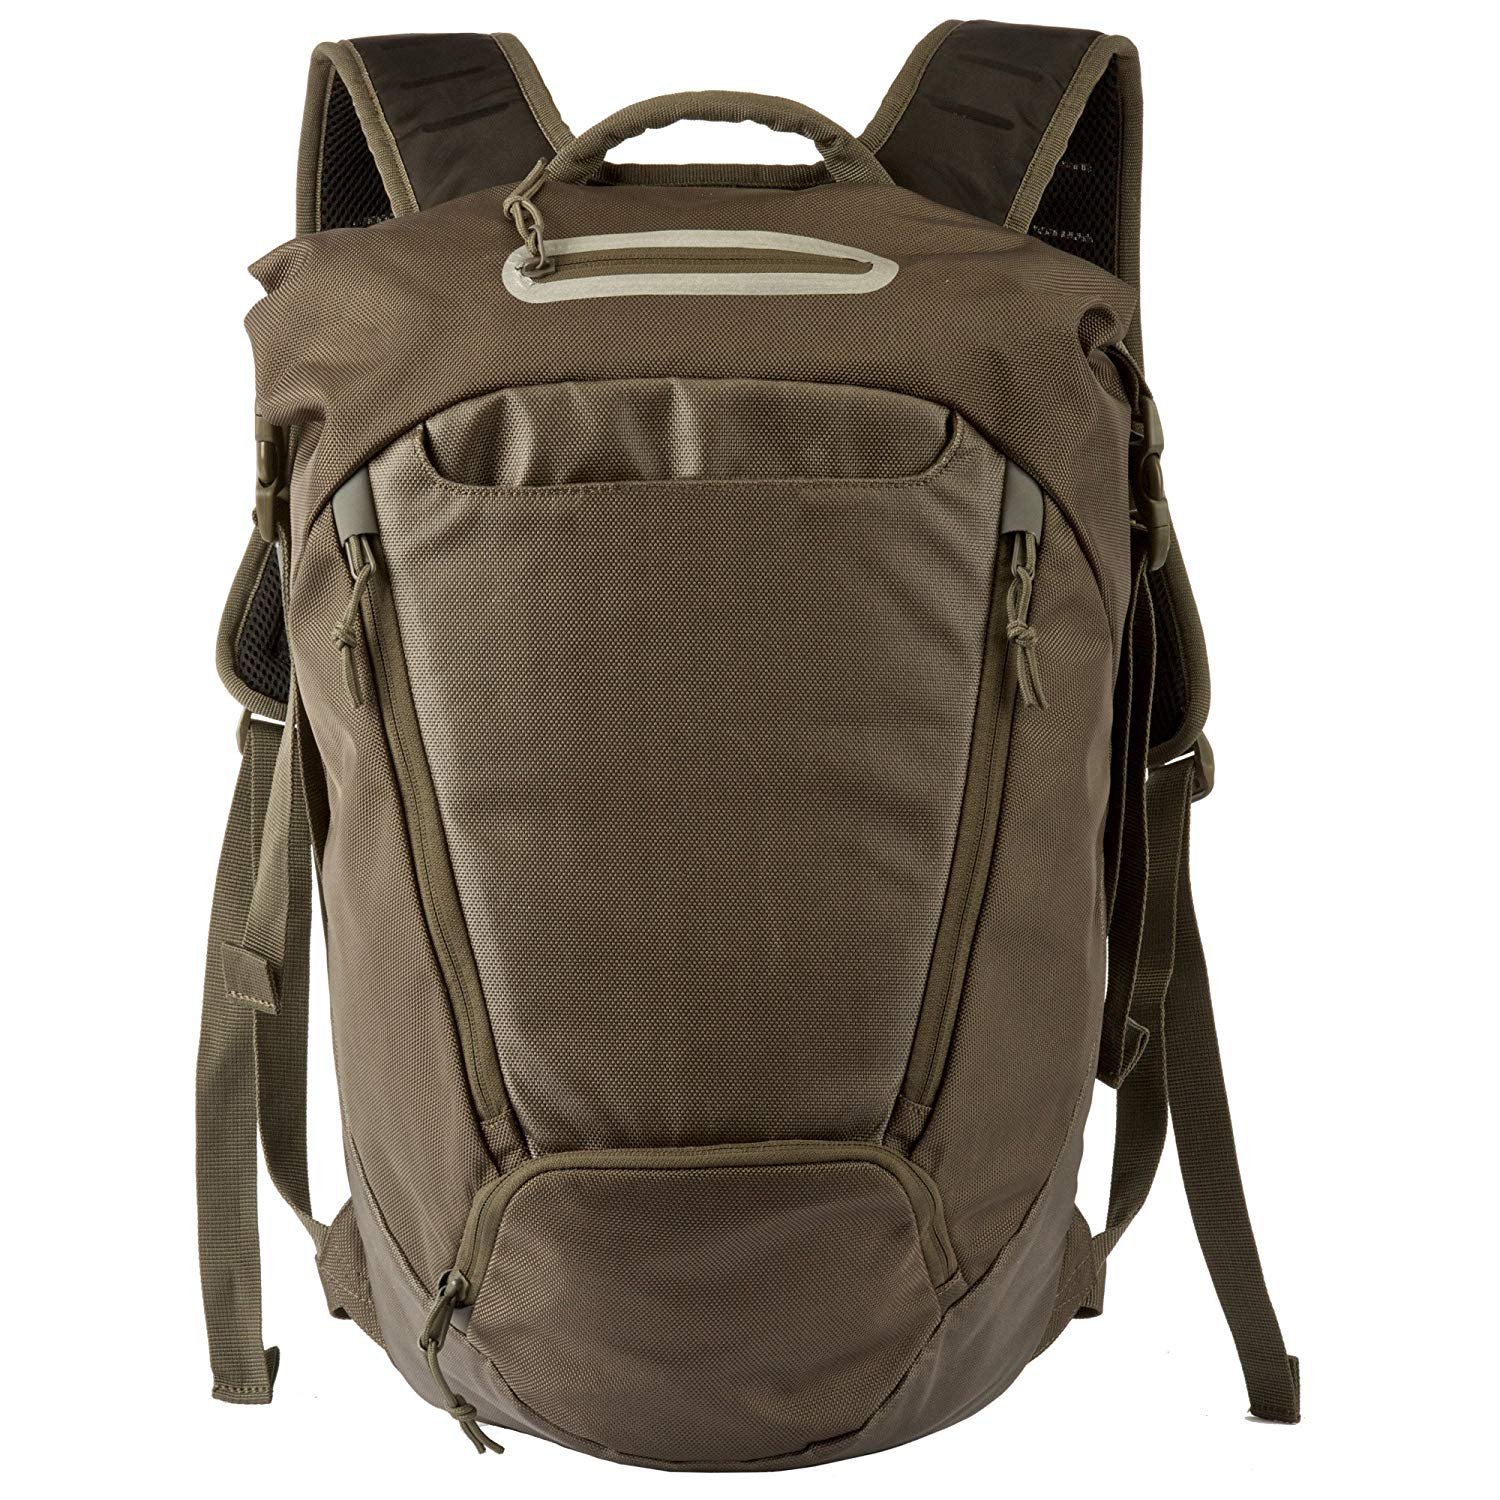 5.11 Tactical Covert Boxpack, 1680D Ballistic Polyester, Water